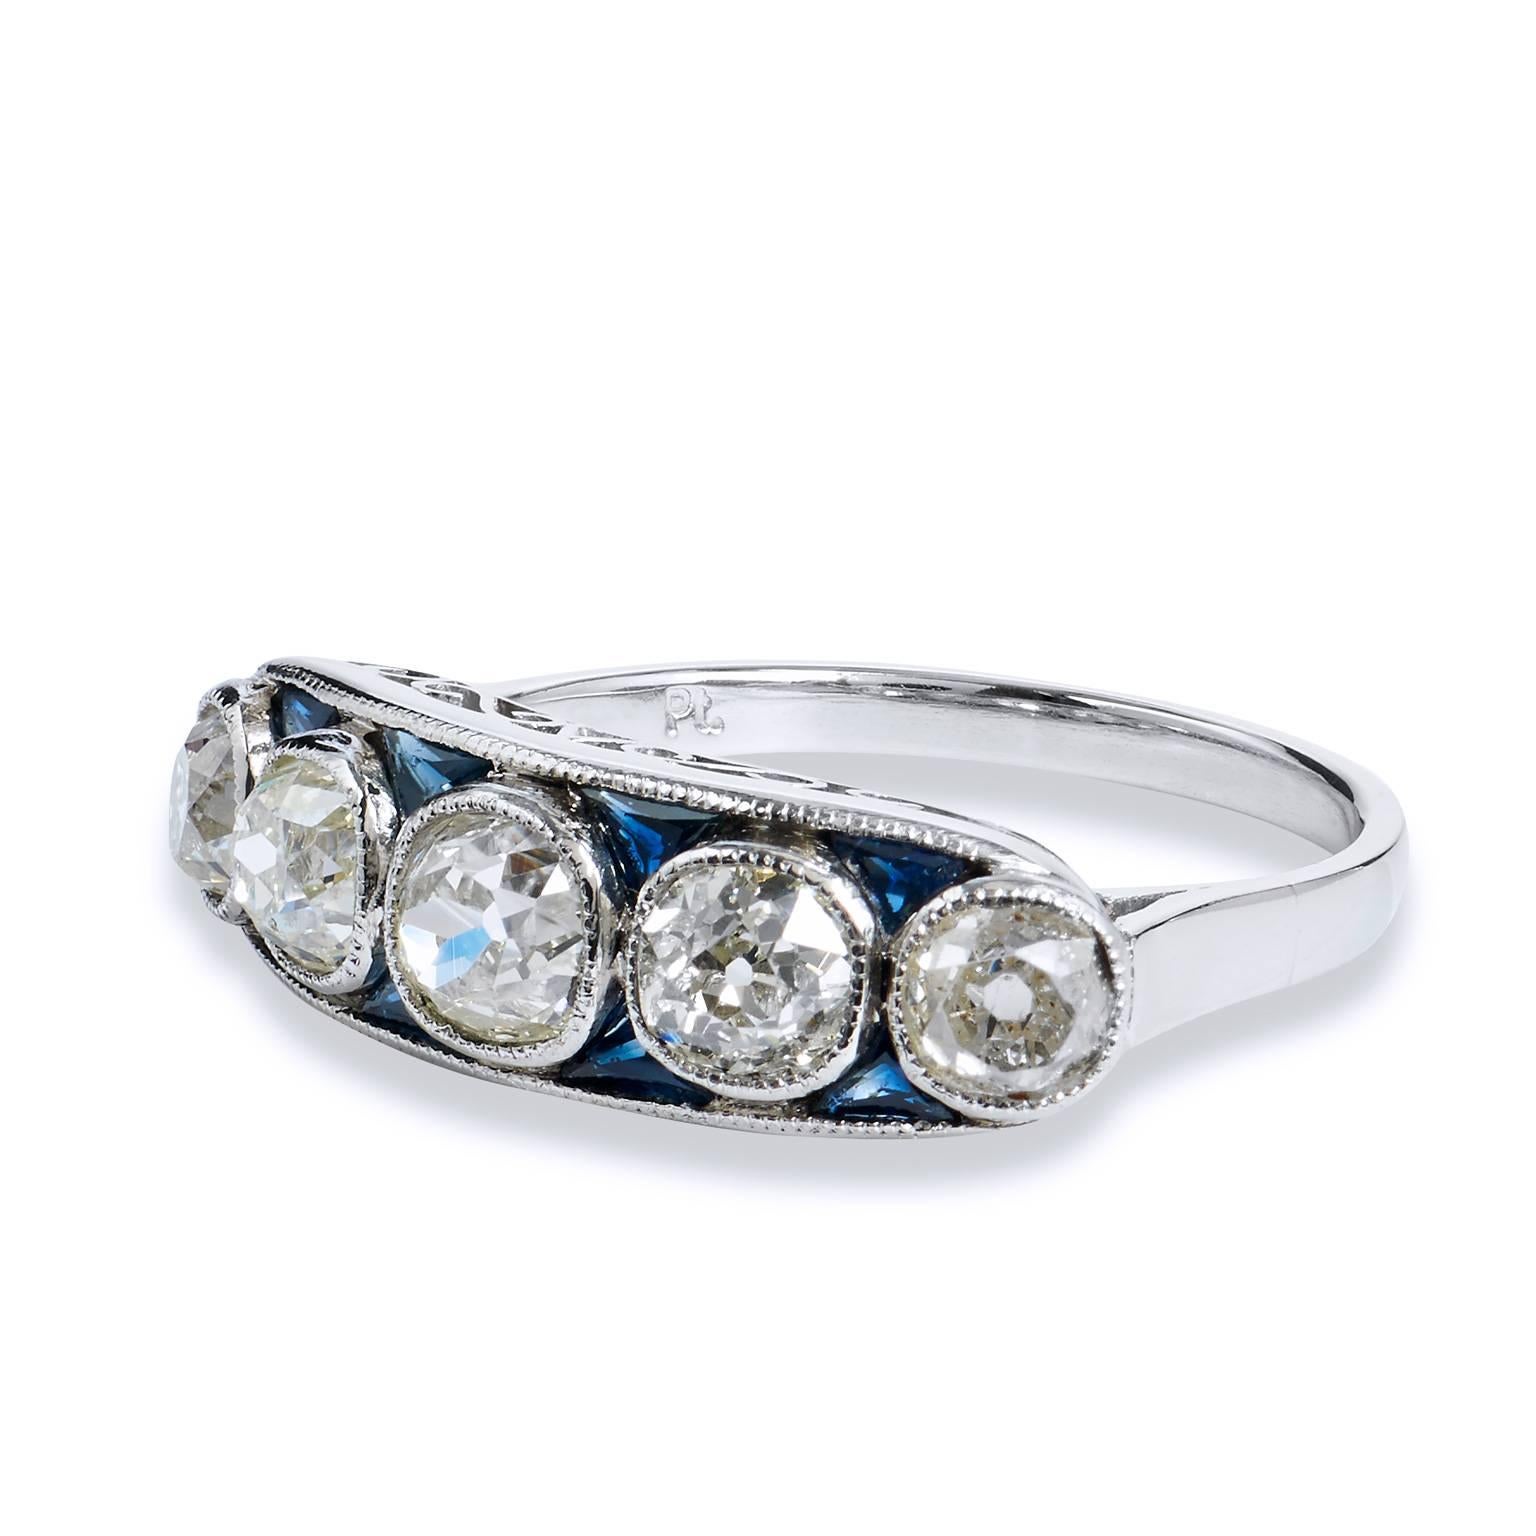 This platinum diamond band ring features 5 old mine cut diamonds, bezel set, with a total weight of 2.15 carats. The diamonds are gracefully interlaced between the sea of 8 pieces of trillion cut blue sapphires, with a total weight of 0.60 carats. 